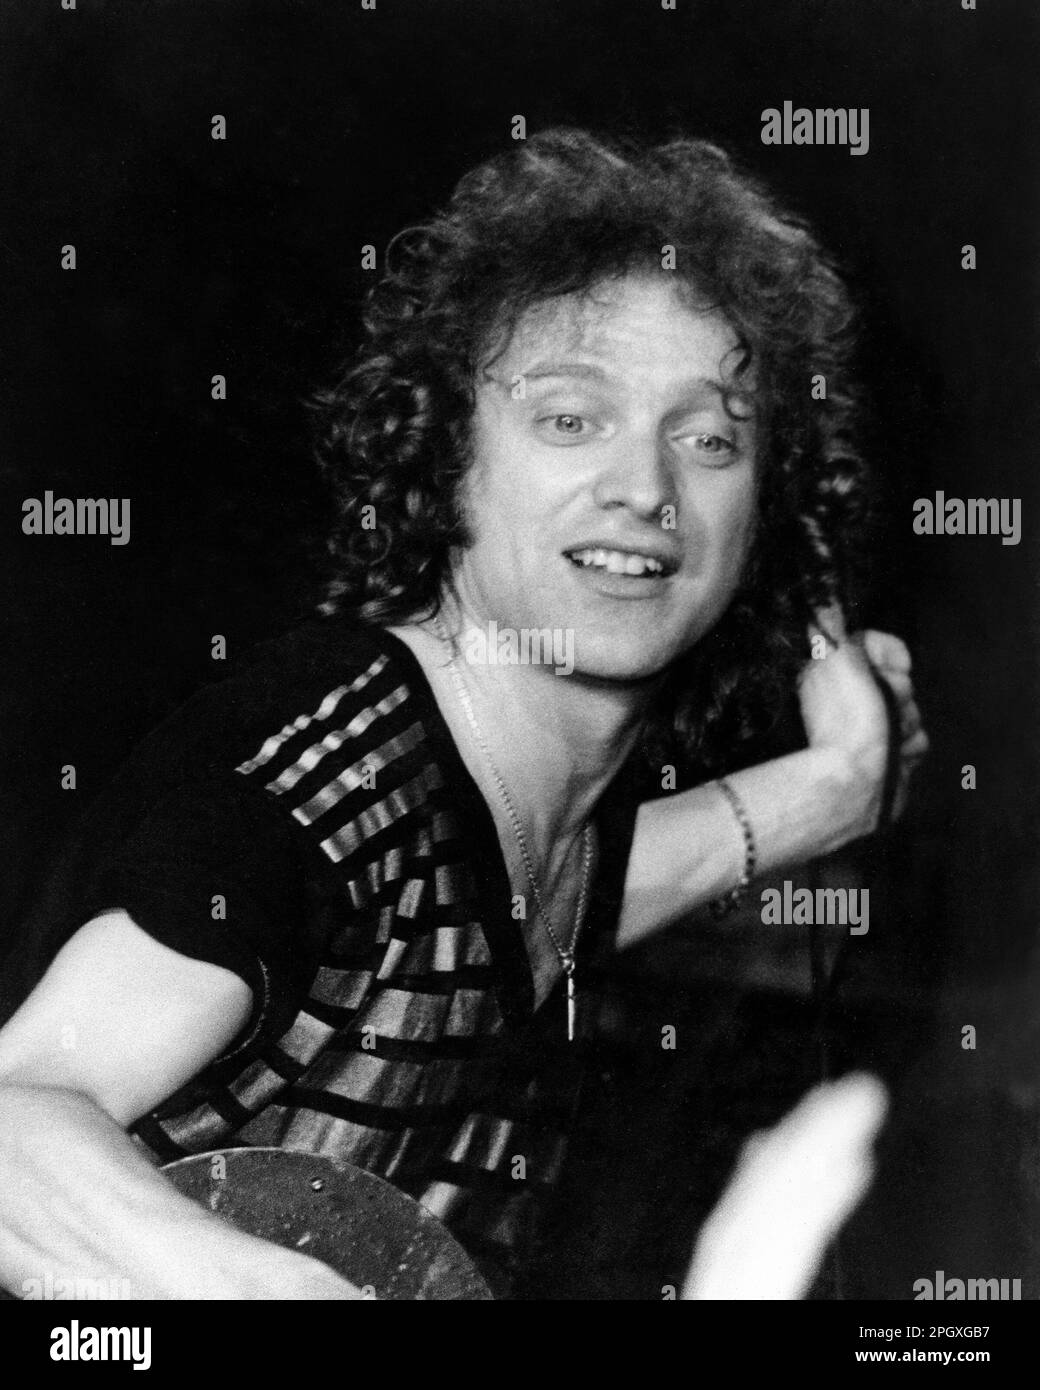 Lou Gramm of Foreigner, Civic Center, Providence, Rhode Island, USA, October 29, 1979. Stock Photo